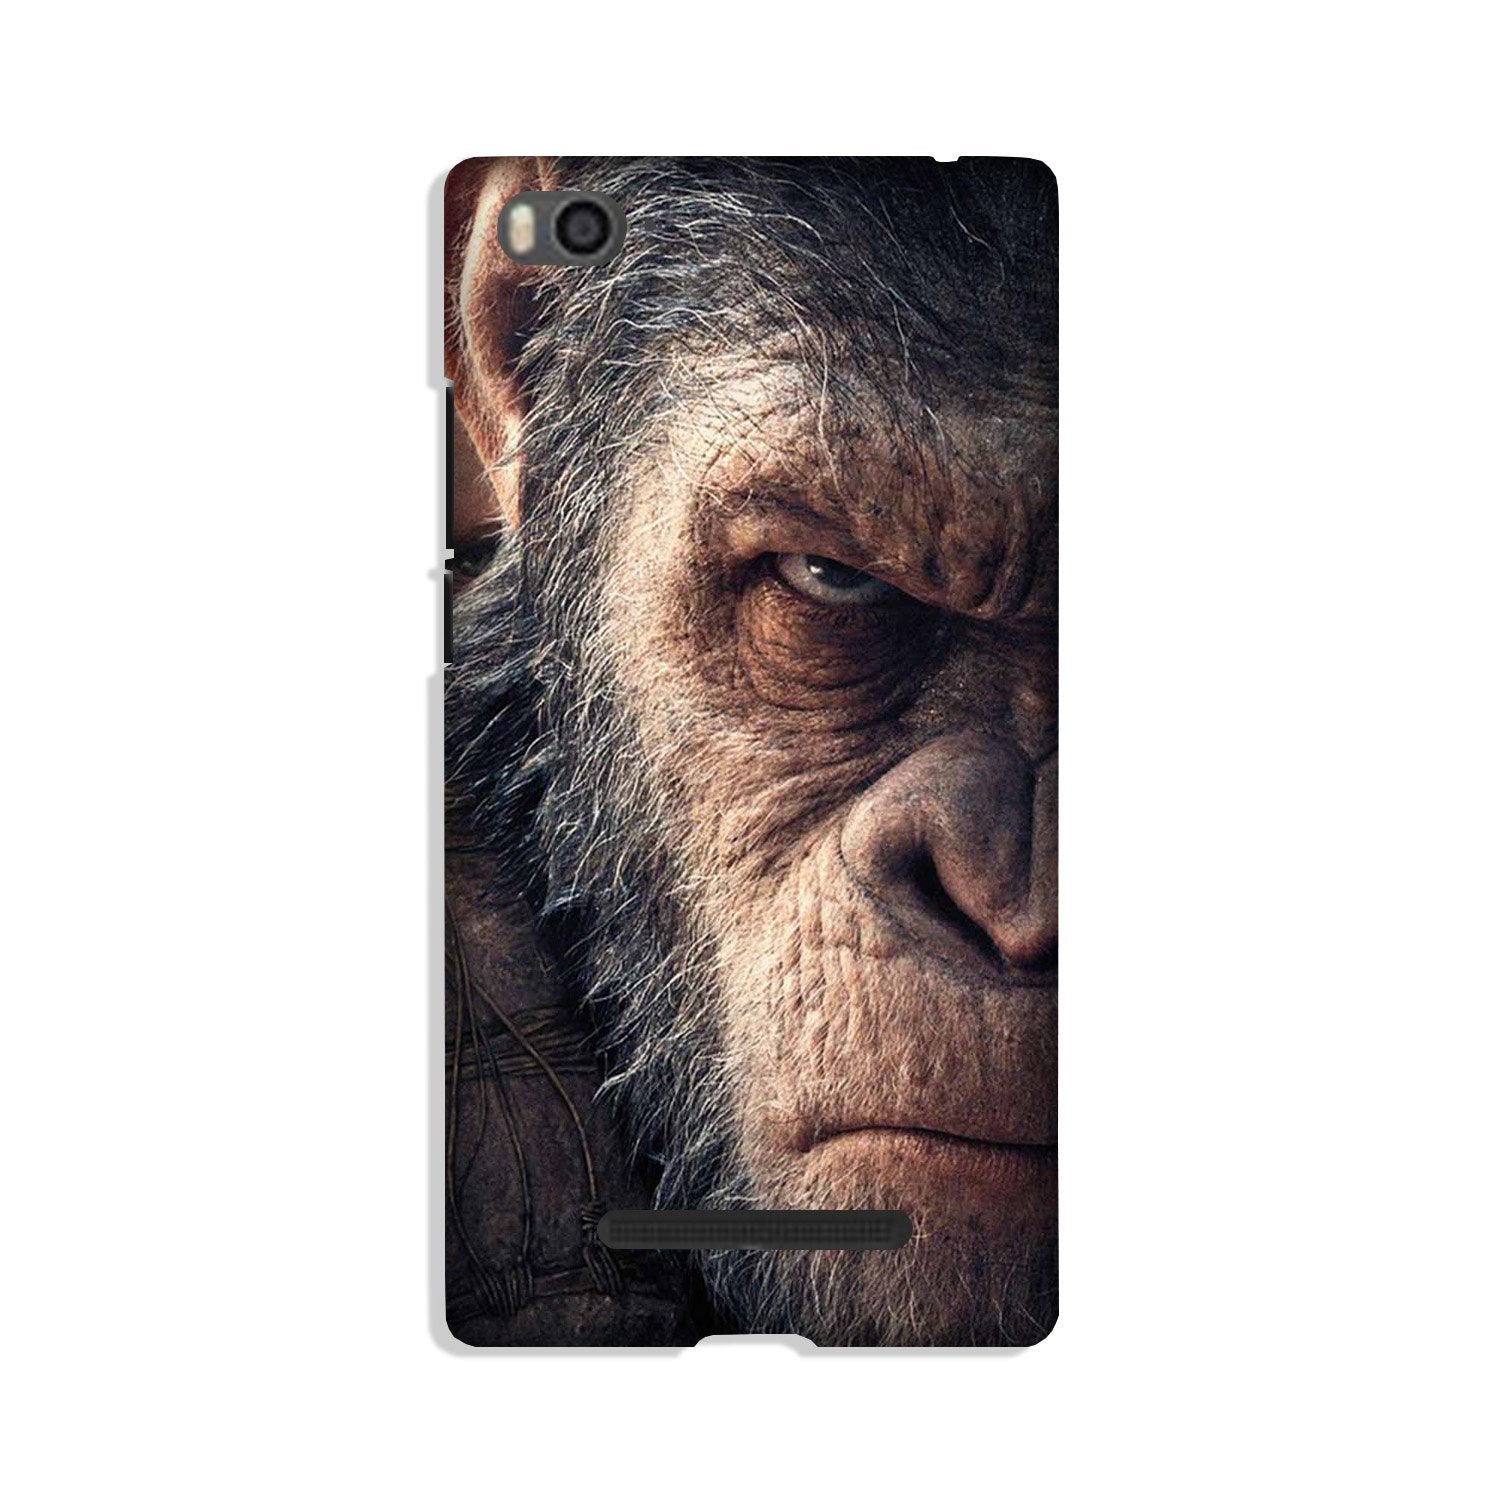 Angry Ape Mobile Back Case for Xiaomi Mi 4i (Design - 316)